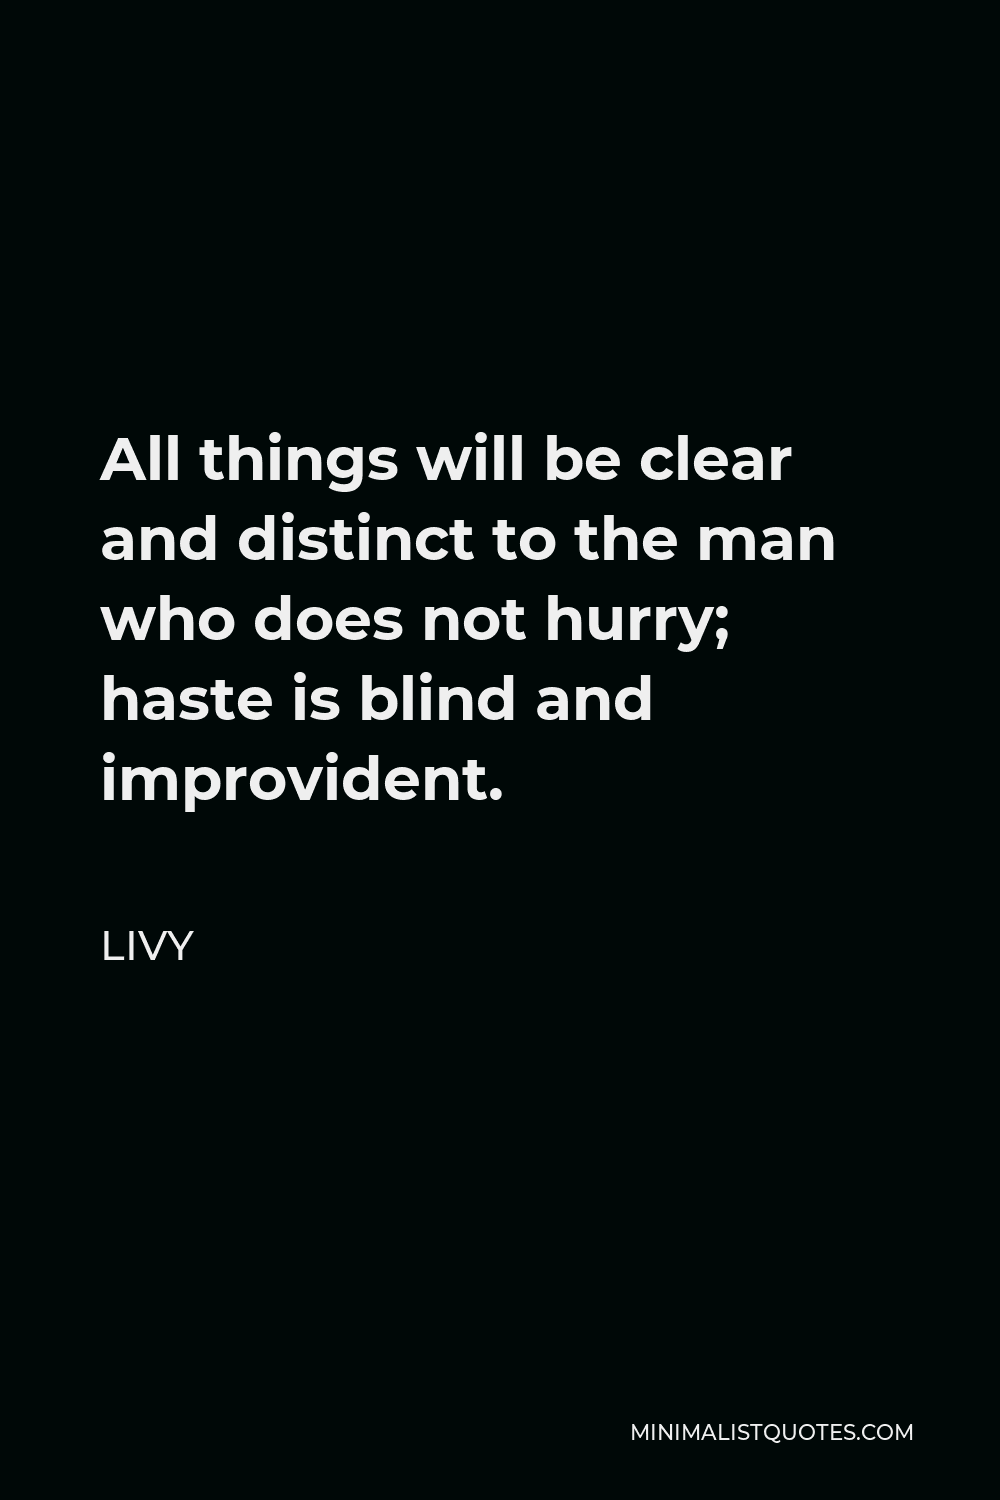 Livy Quote - All things will be clear and distinct to the man who does not hurry; haste is blind and improvident.